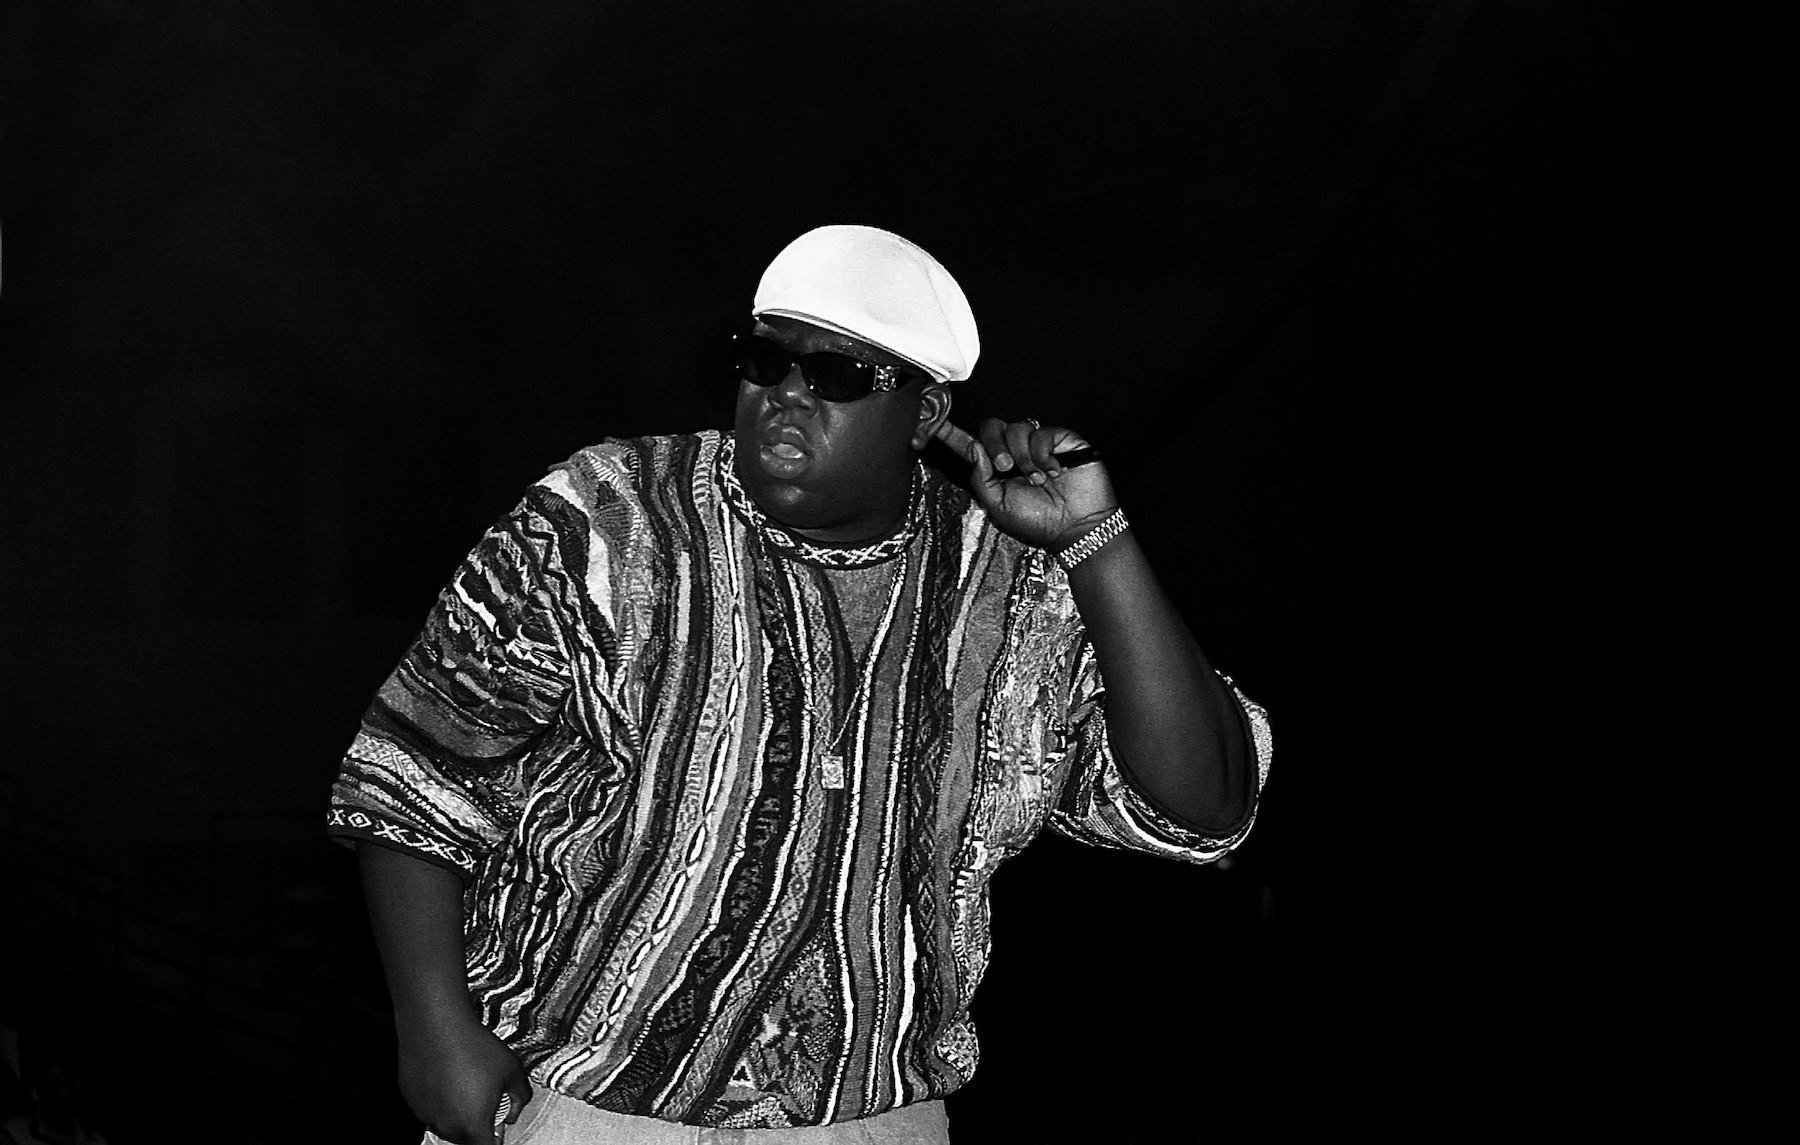 Biggie Smalls, who later changed his name to The Notorious B.I.G.